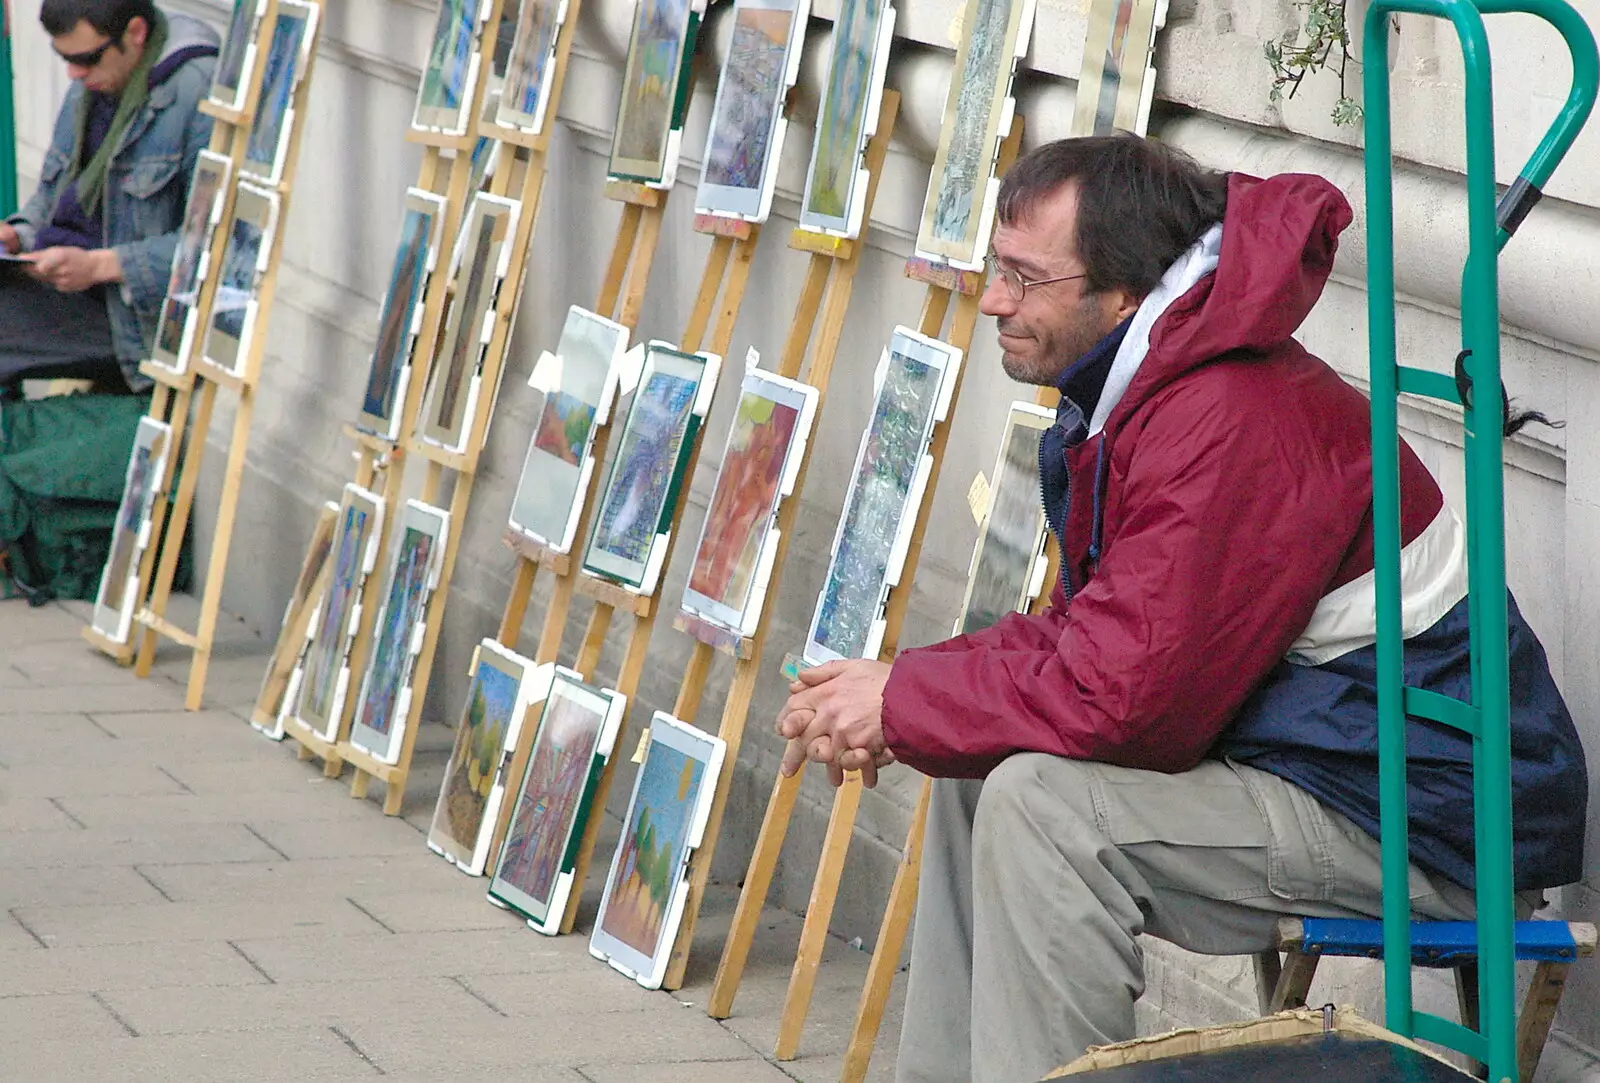 Outside Lloyds Bank, a painter waits for a sale, from Norwich Market, the BSCC at Occold, and Diss Publishing - 10th April 2005